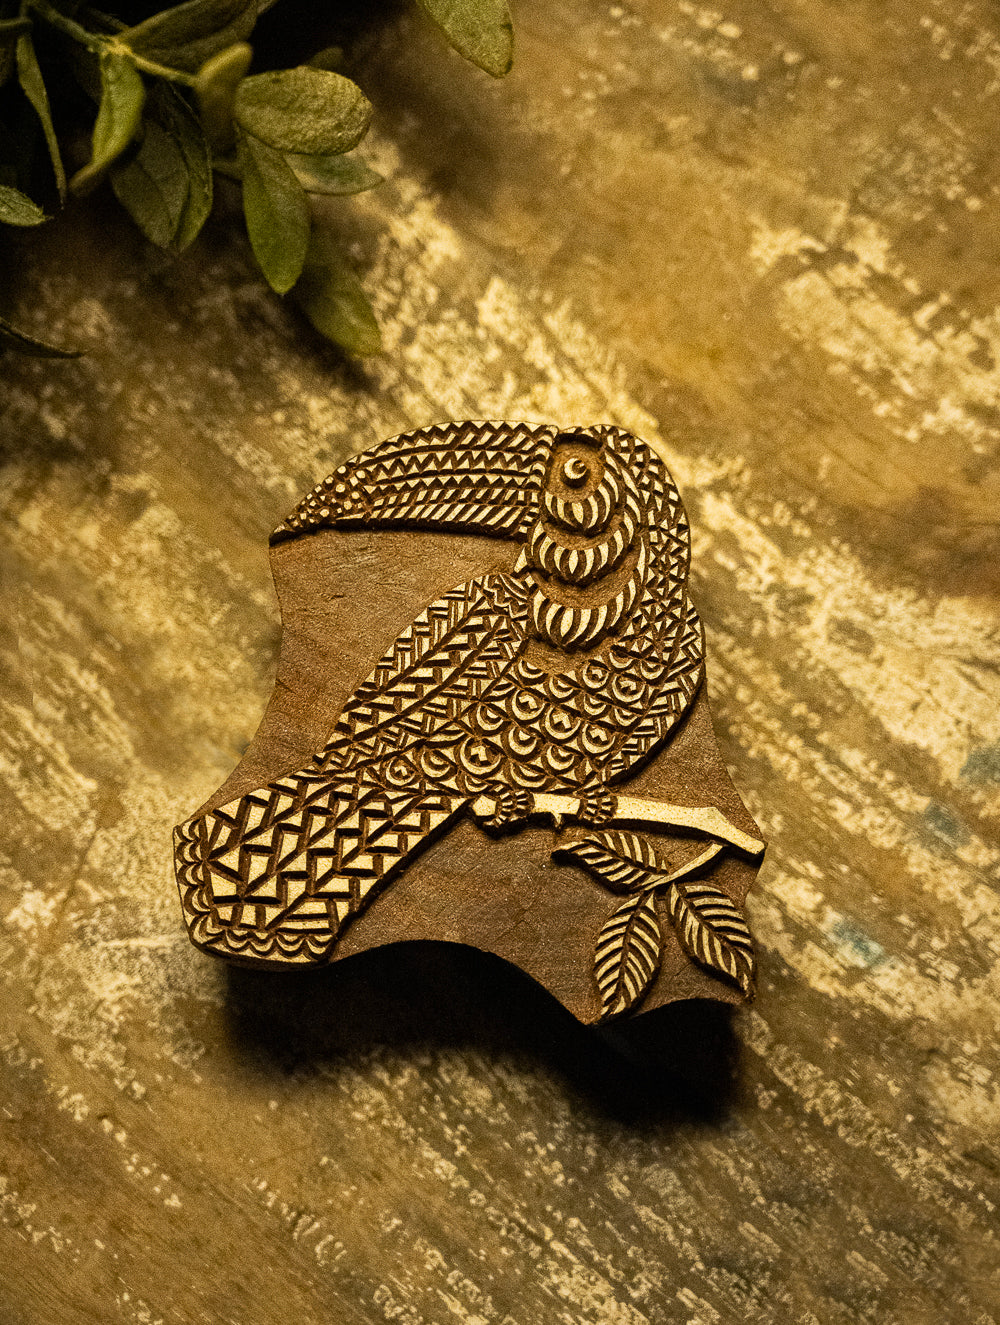 Load image into Gallery viewer, Nazakat. Exclusive, Fine Hand Engraved Wood Block Curio - Woodpecker